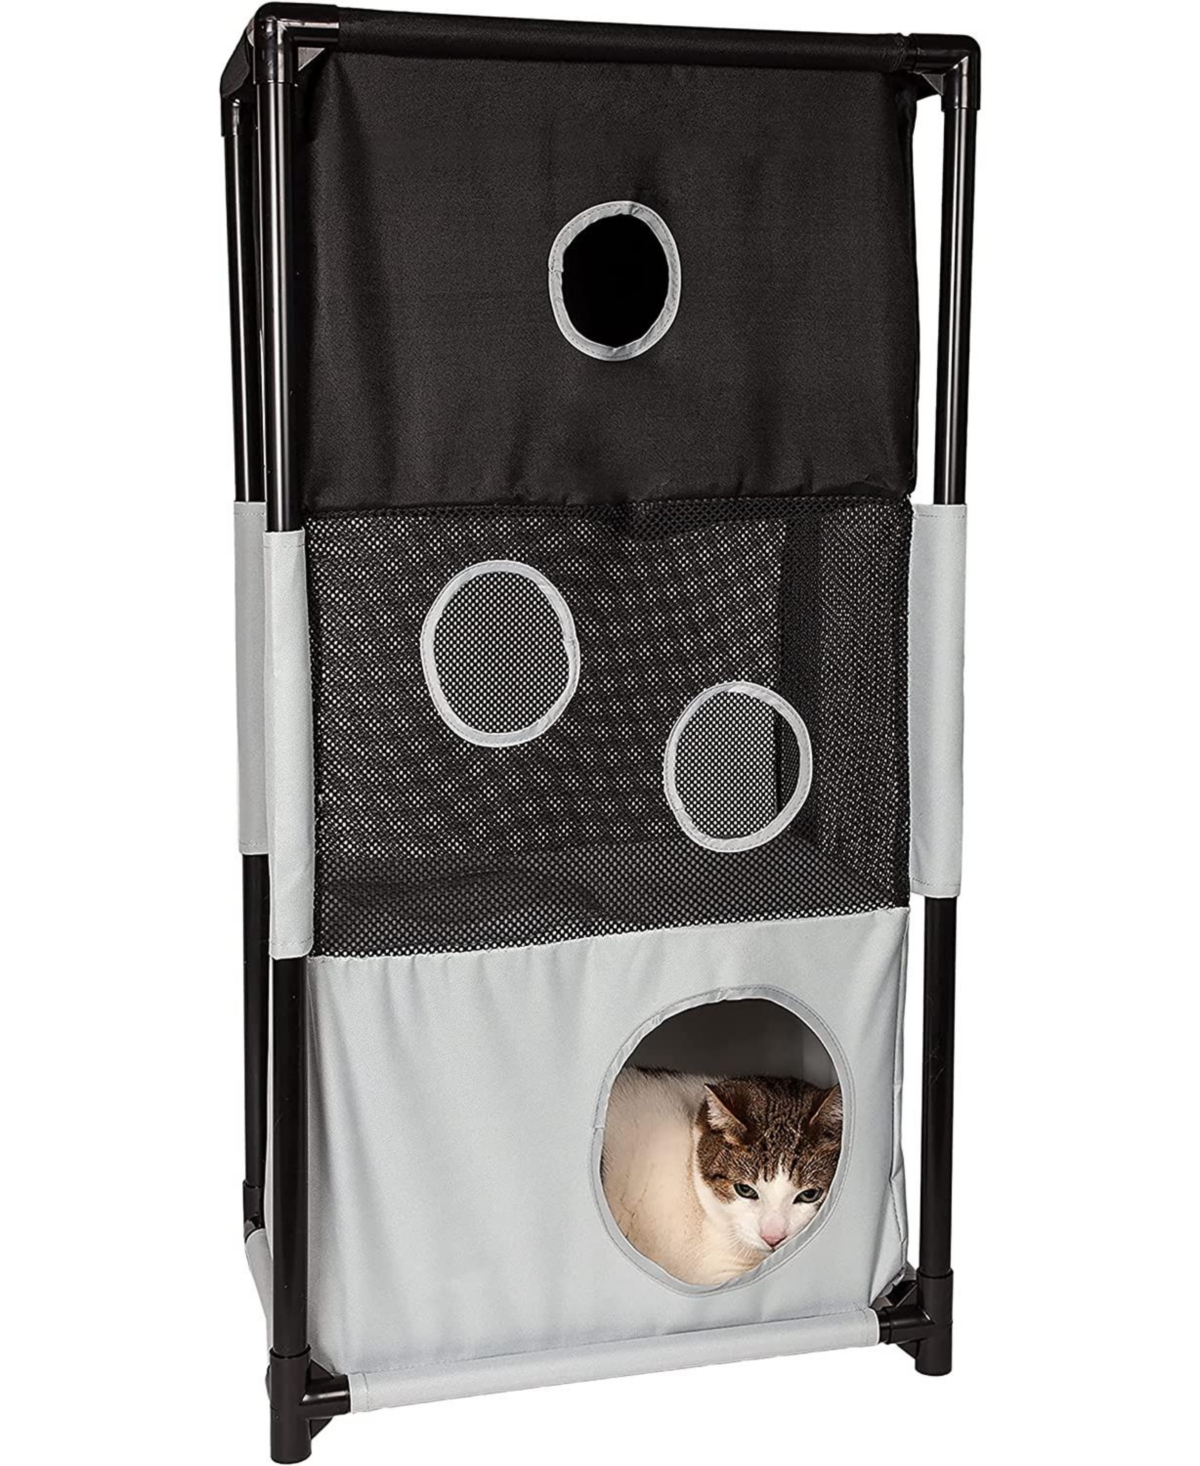 Pet Life Airline Approved 'Flightmax' Collapsible Pet Carrier